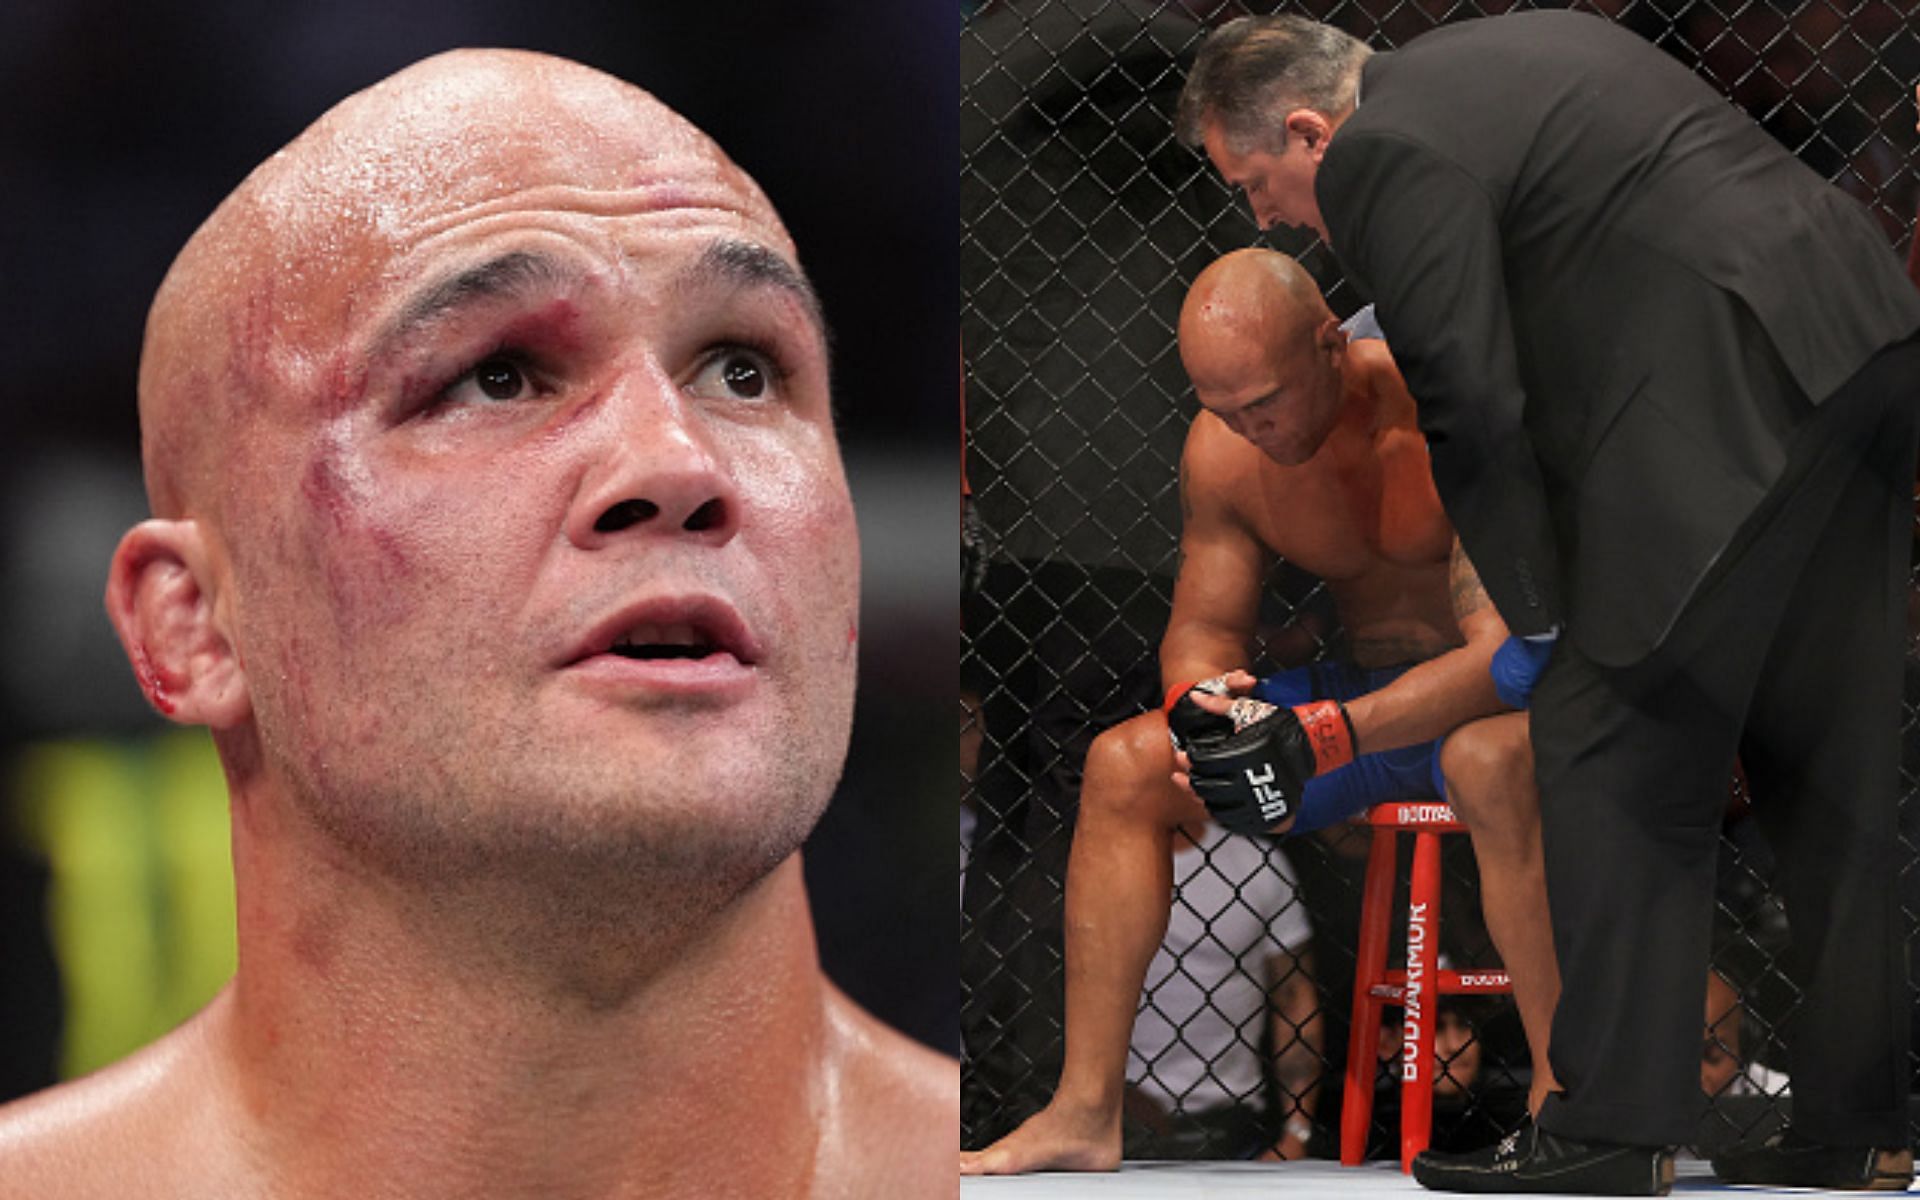 Robbie Lawler (Left) and Lawler after losing to Bryan Barberena (Right)(Images via Getty)